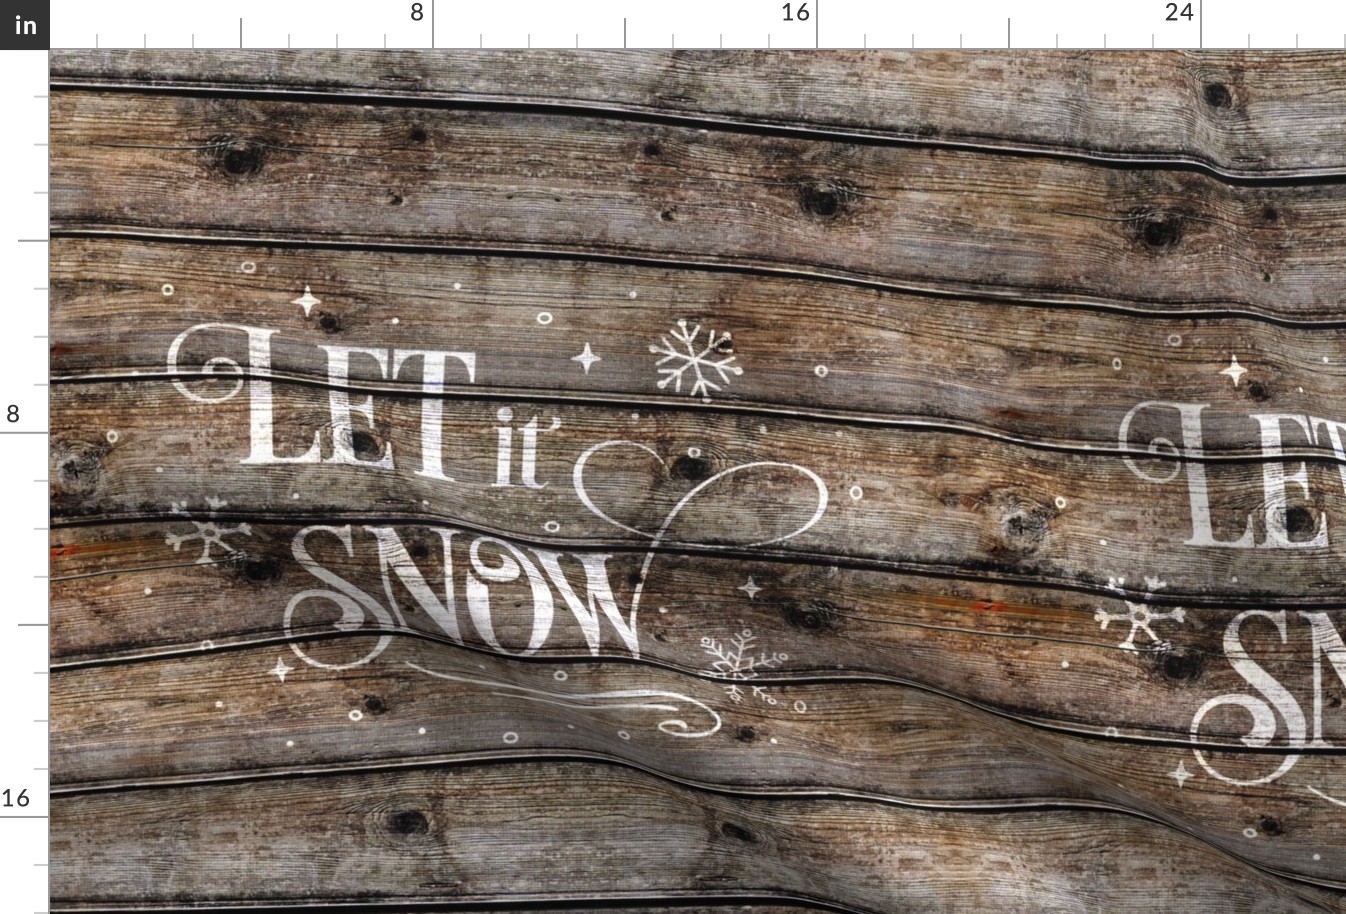 Let It Snow Version 2 on Barn Wood 18 inch square